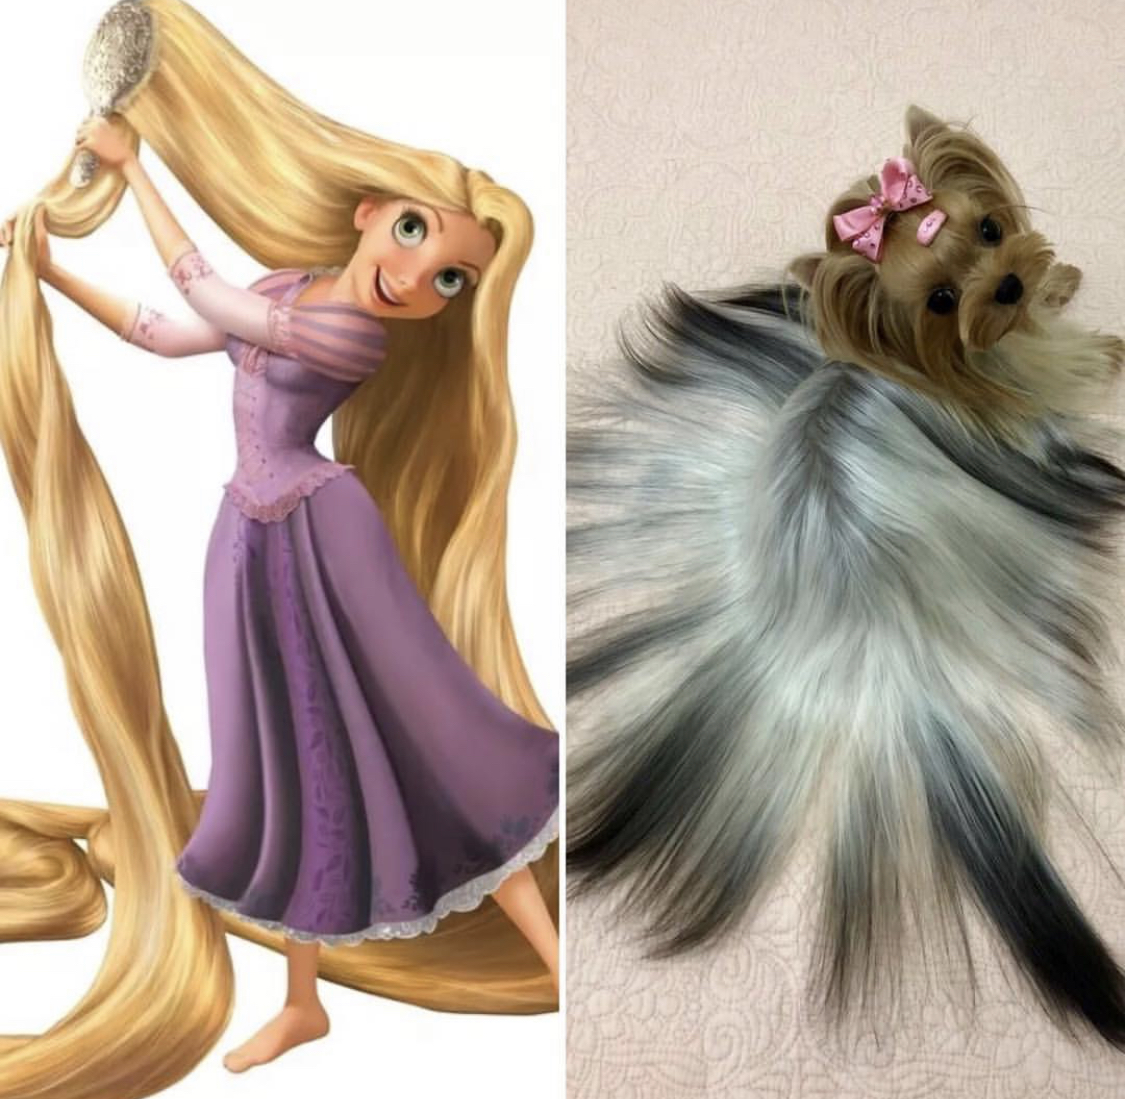 photo of Rupunzel combing its long hair next to the photo of a Yorkshire Terrier lying down on the floor with its straight hair spread out